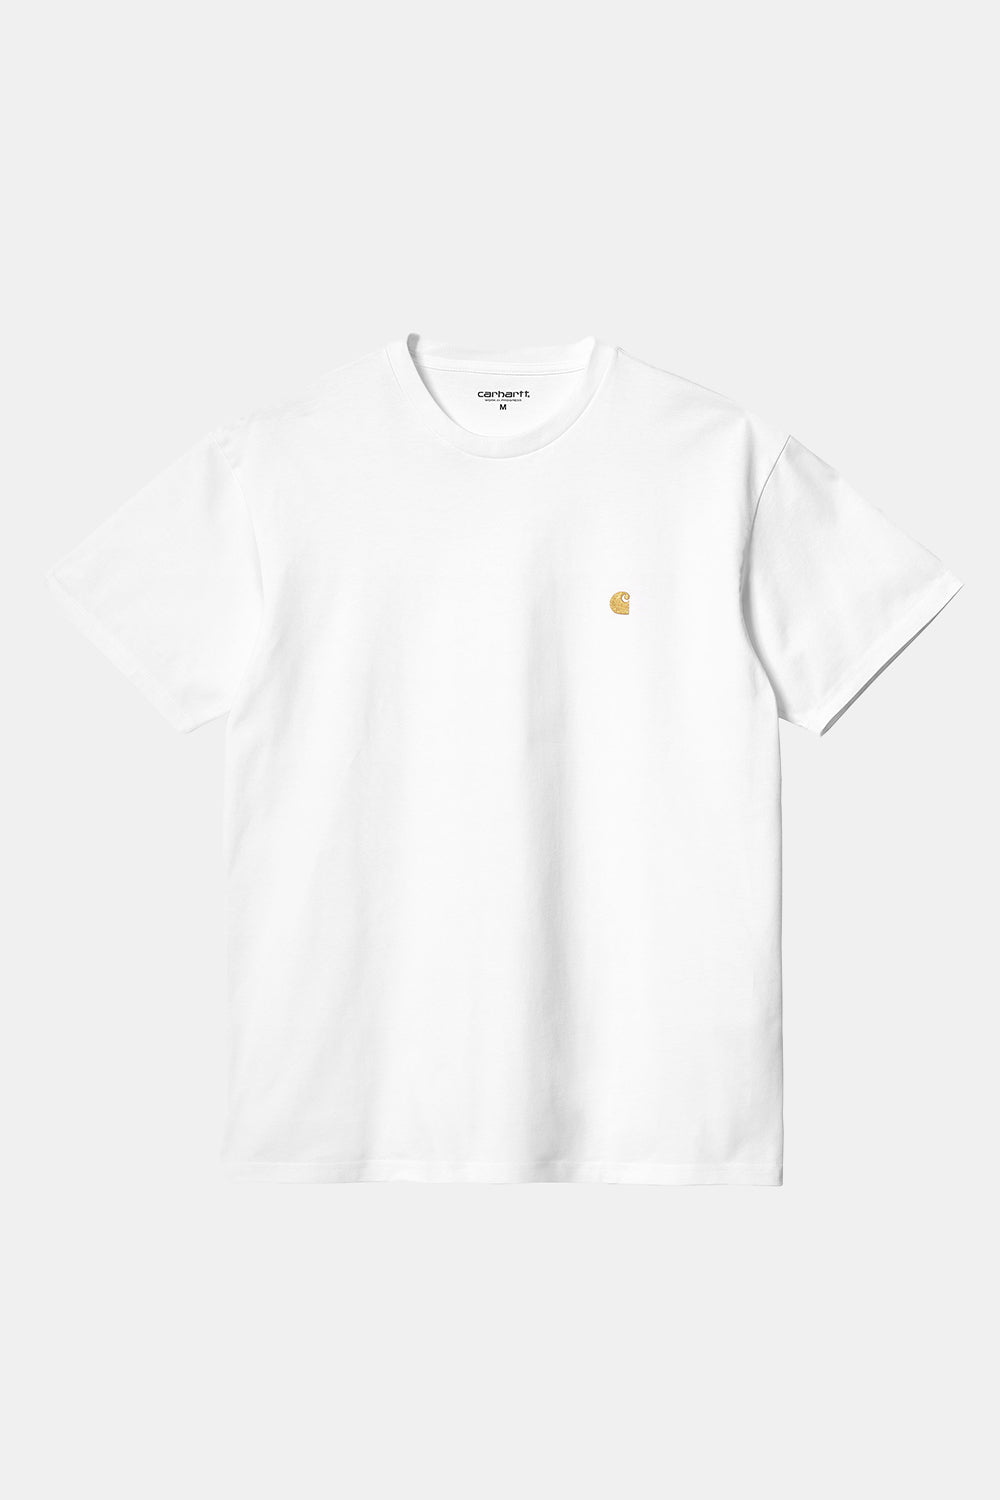 Carhartt WIP Short Sleeve Chase T-Shirt (White/Gold) | Number Six